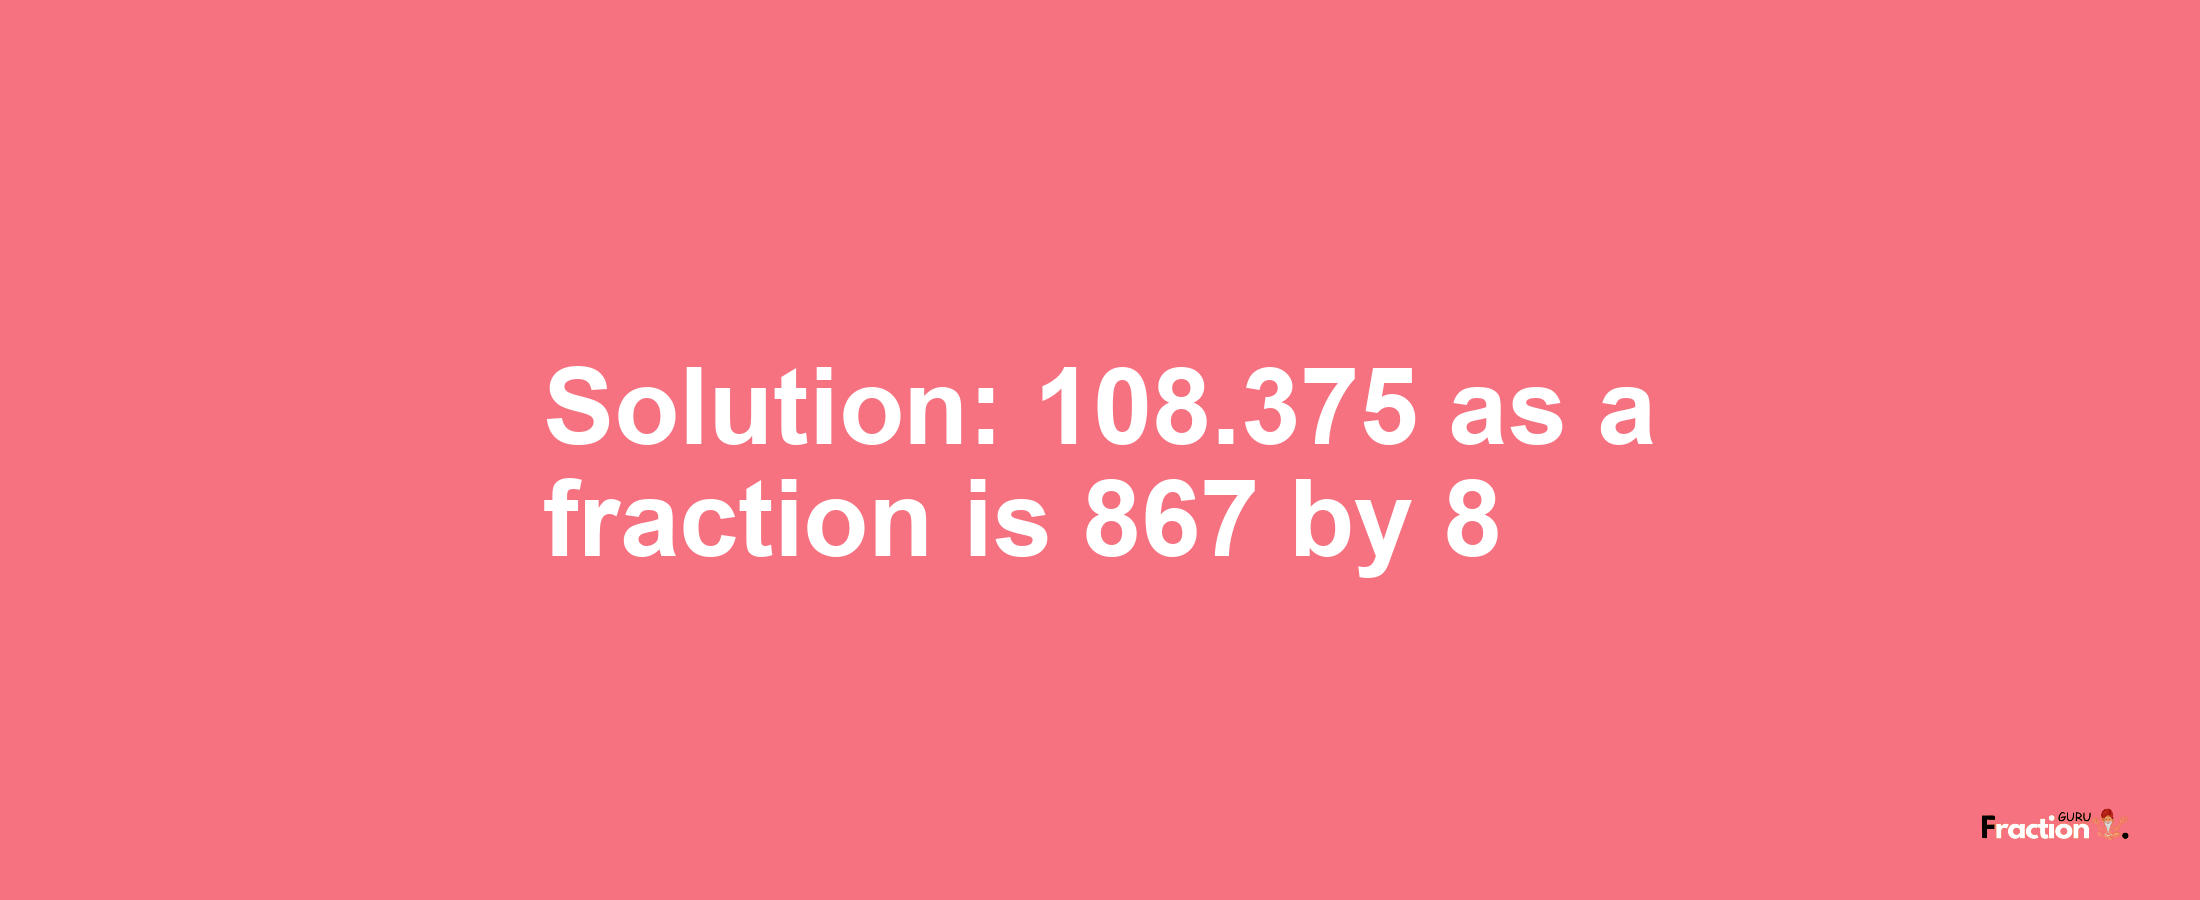 Solution:108.375 as a fraction is 867/8